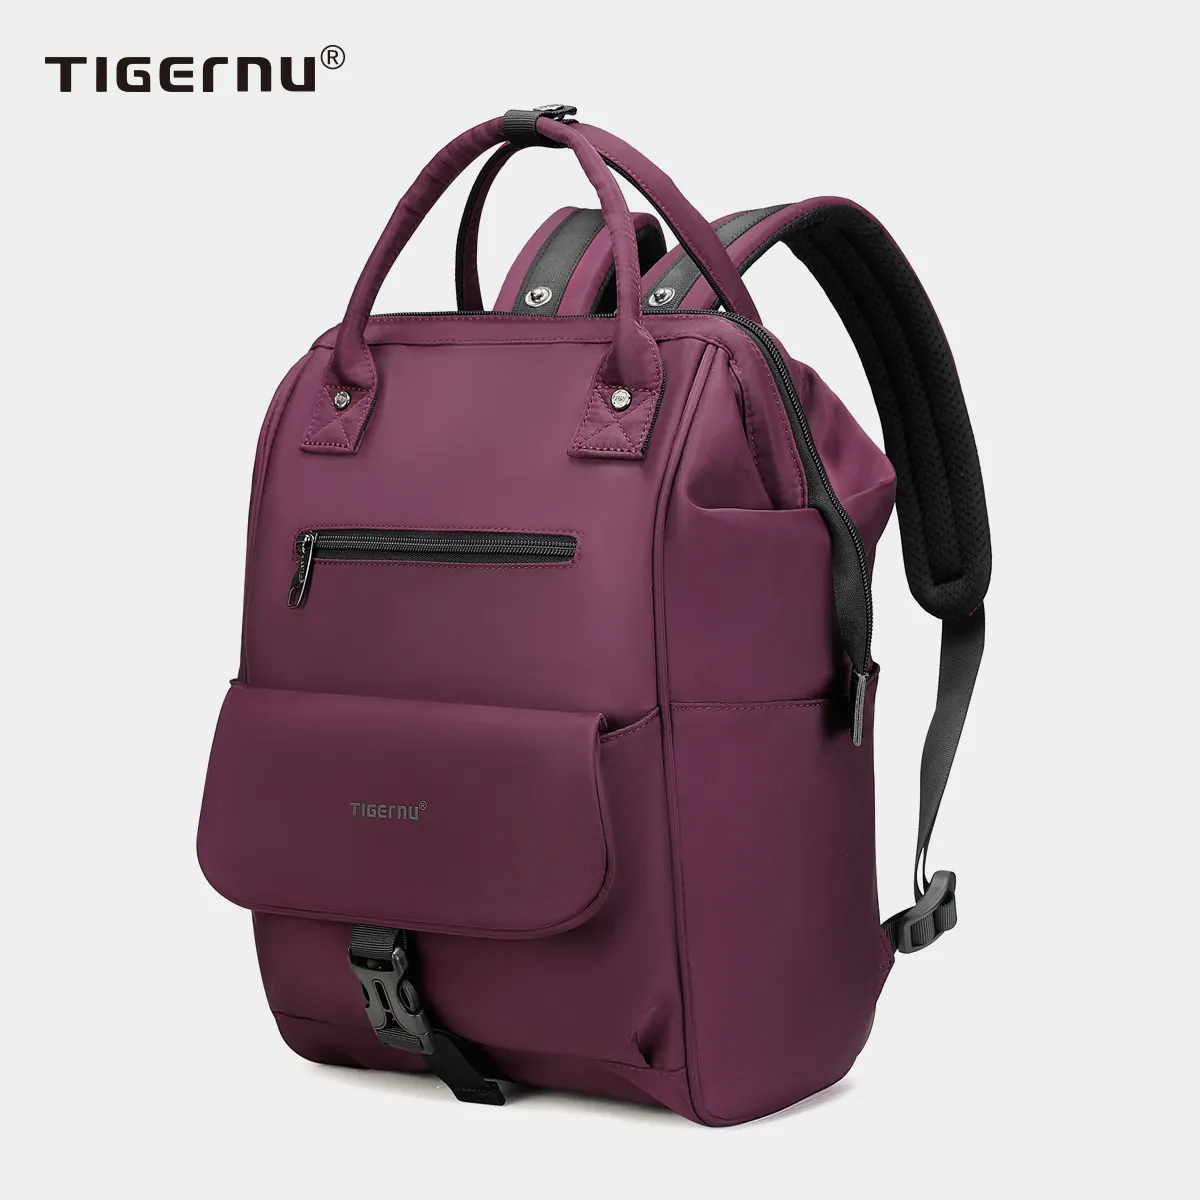 Tigernu T-B3184 14 inch large capacity college student school bag pack mochila mujer laptop backpack for women